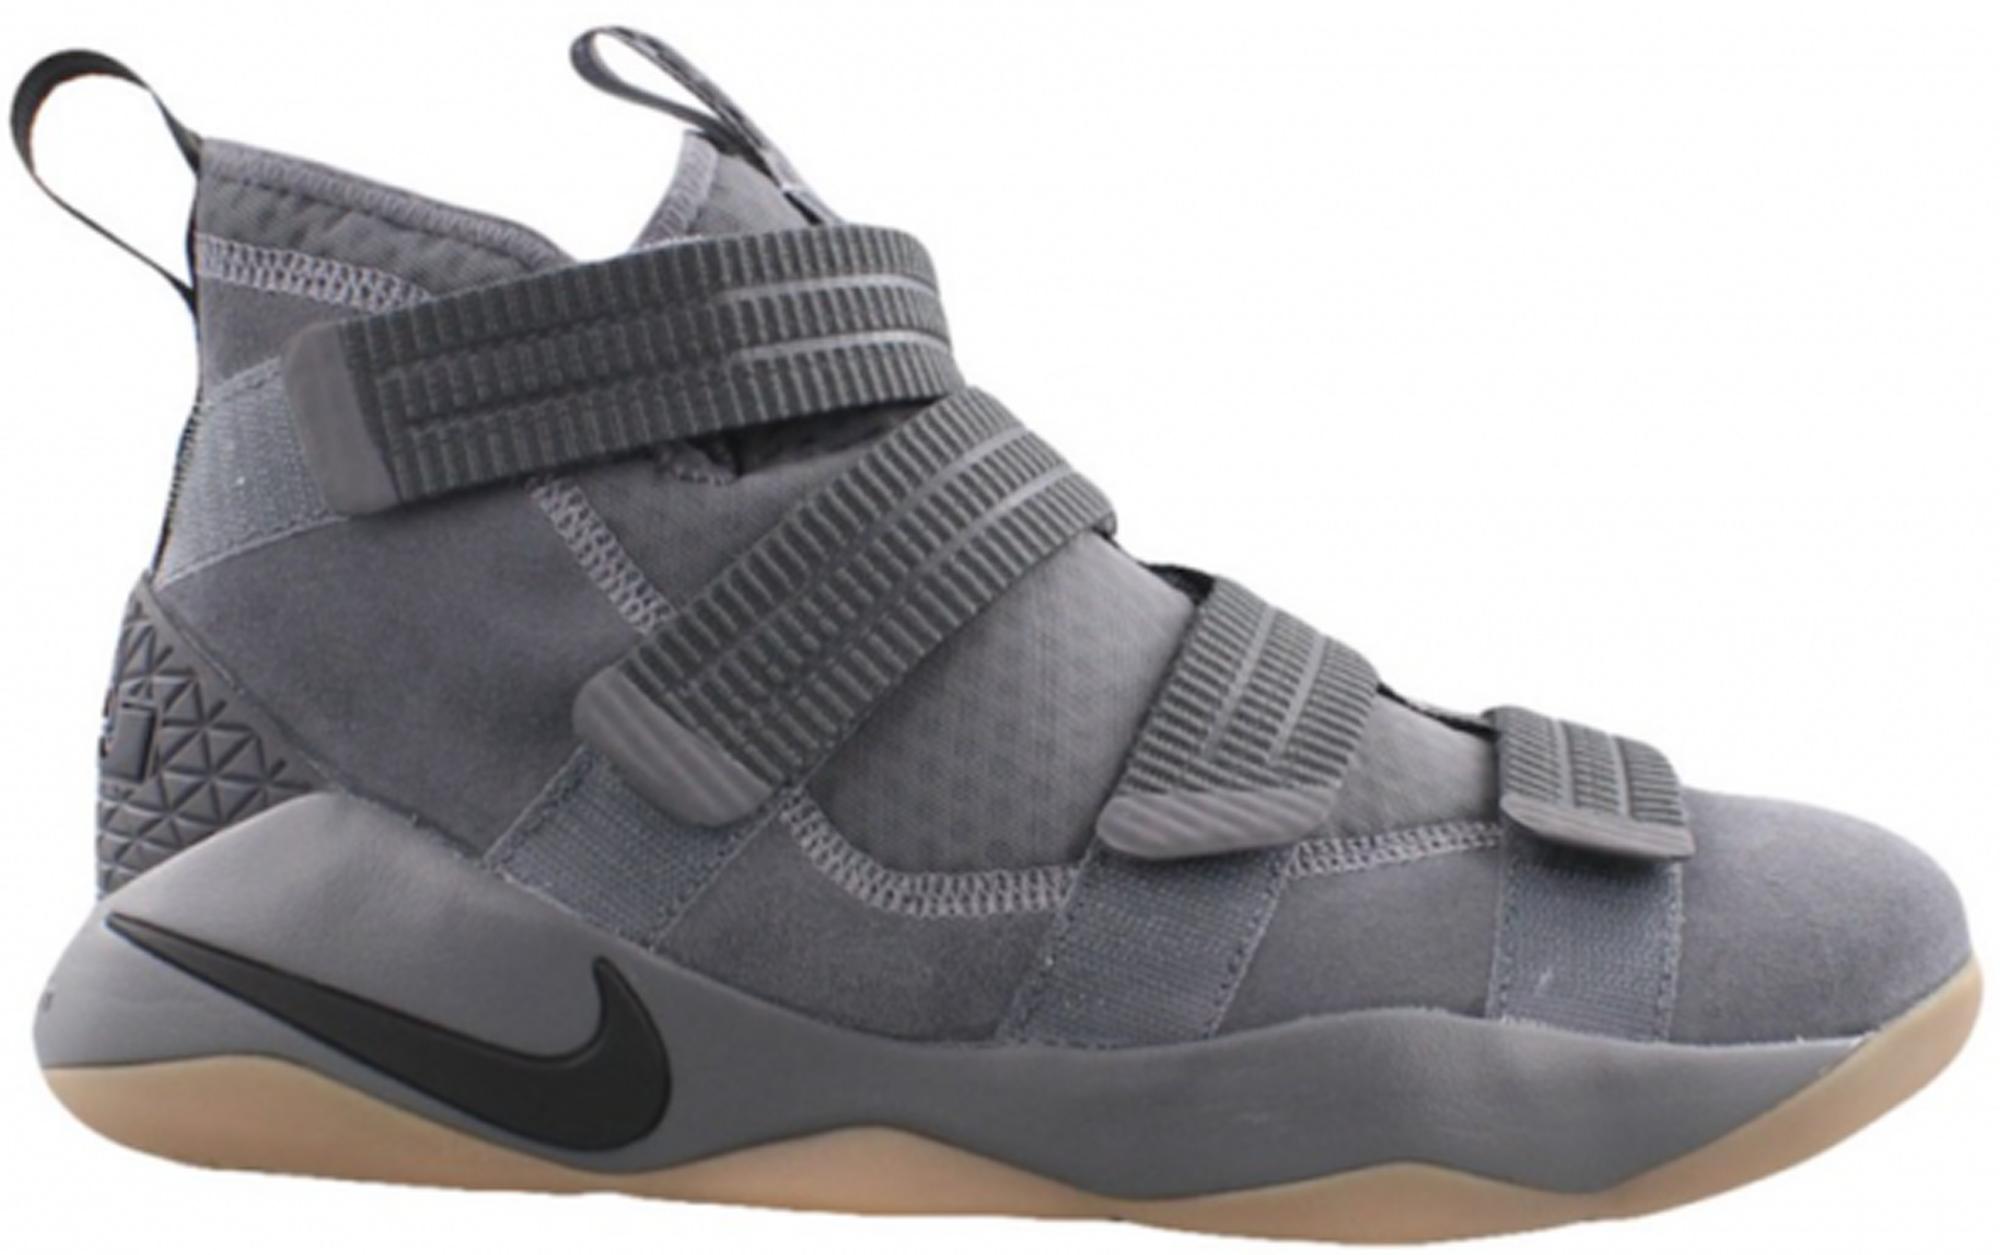 Nike Lebron Zoom Soldier 11 Grey Gum in Gray for Men - Lyst